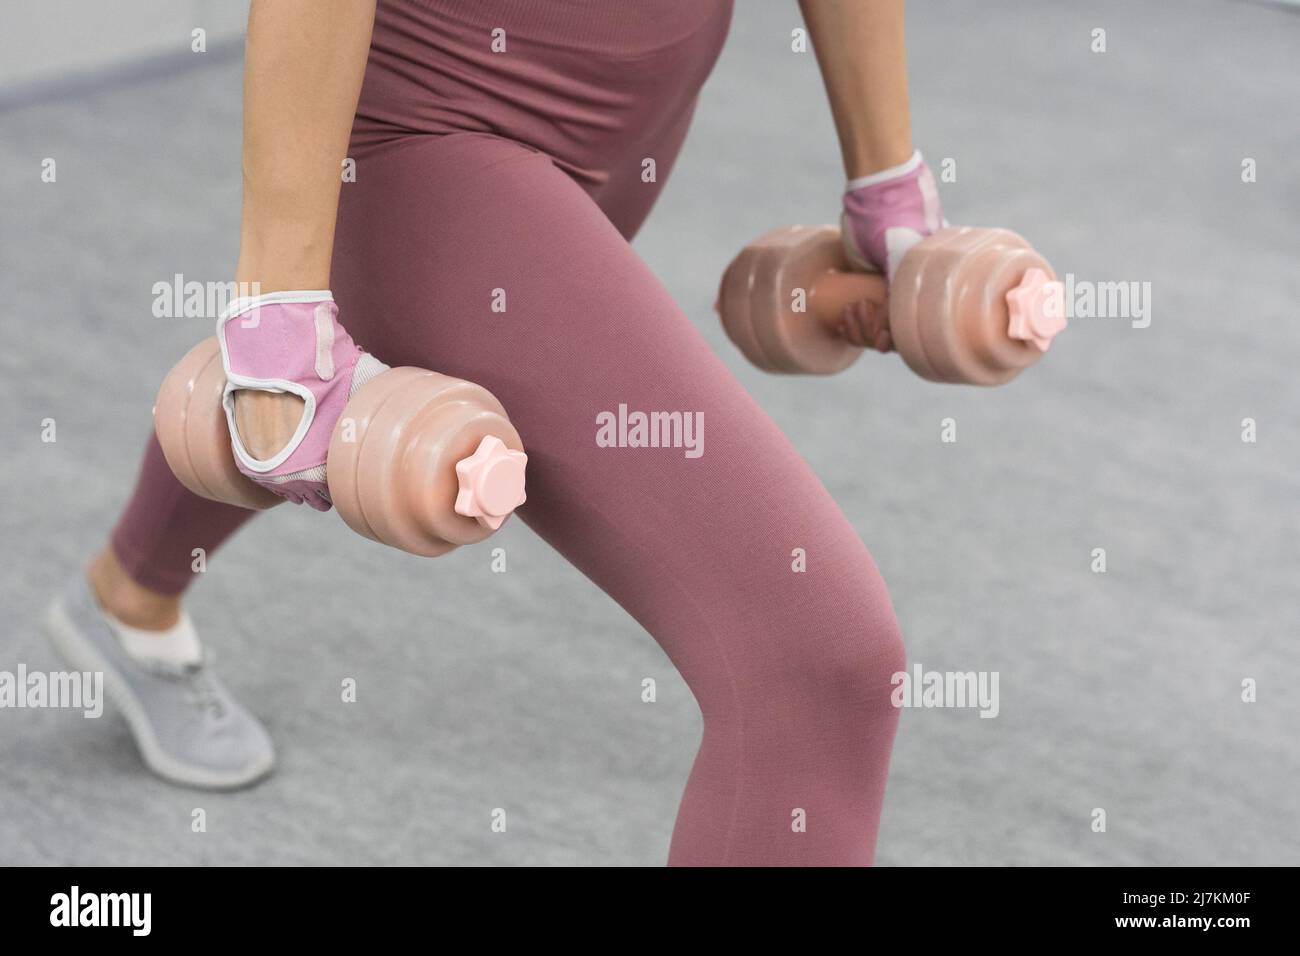 No face visible. Athletic young woman doing heavy lifting using dumbbell at the gym. Young woman exercise using dumbbell to lose weight or burn calories. Stock Photo